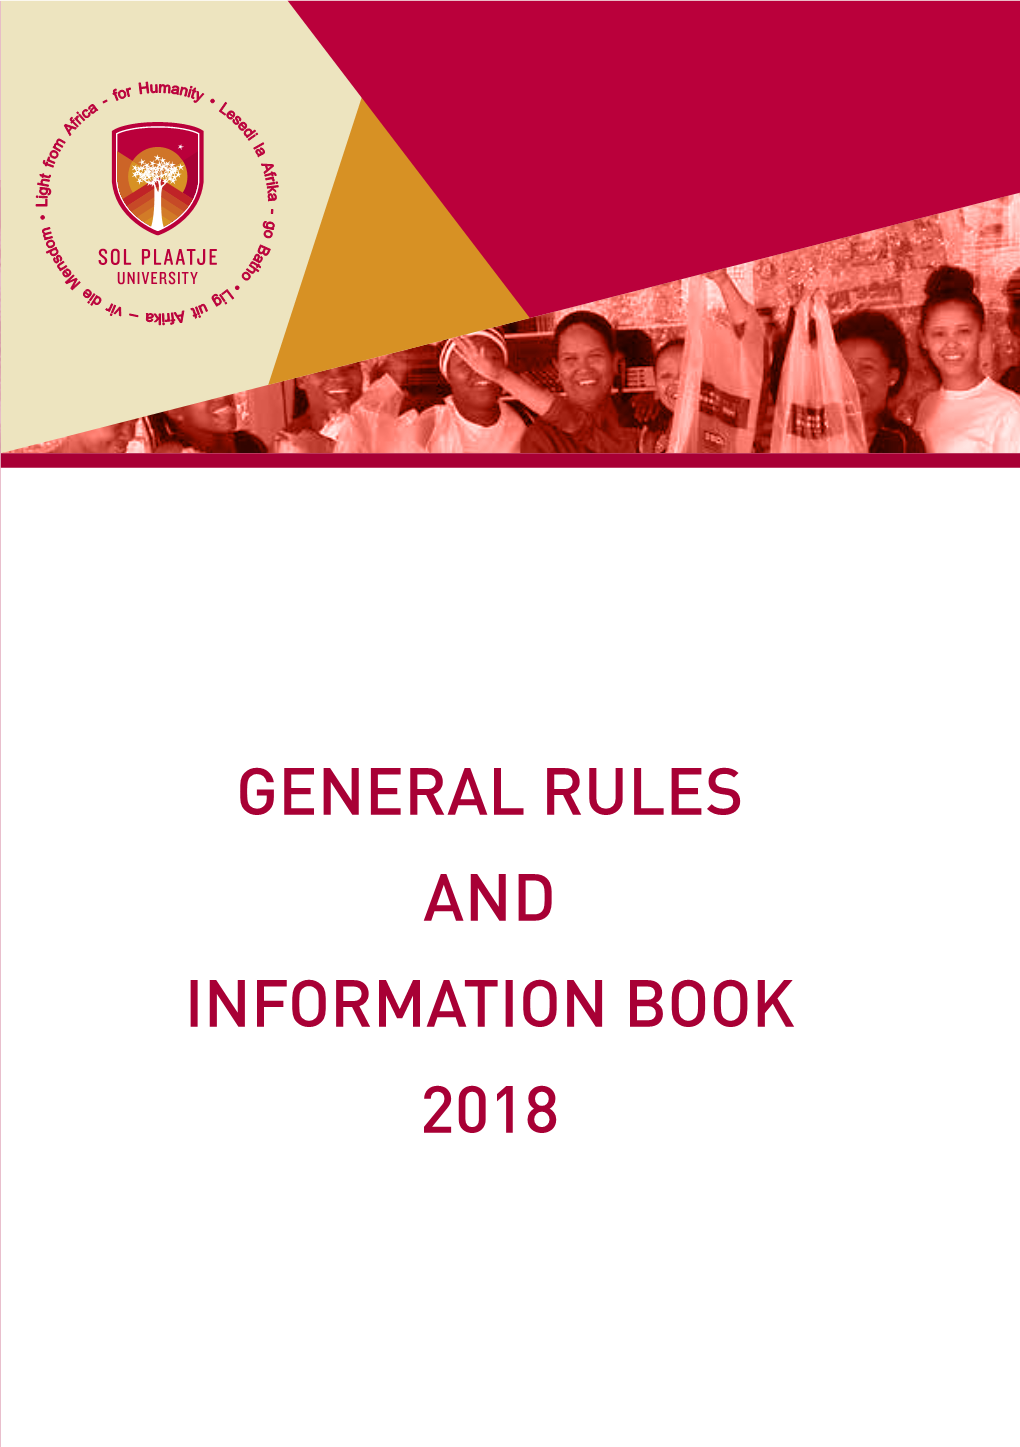 GENERAL RULES and INFORMATION BOOK 2018